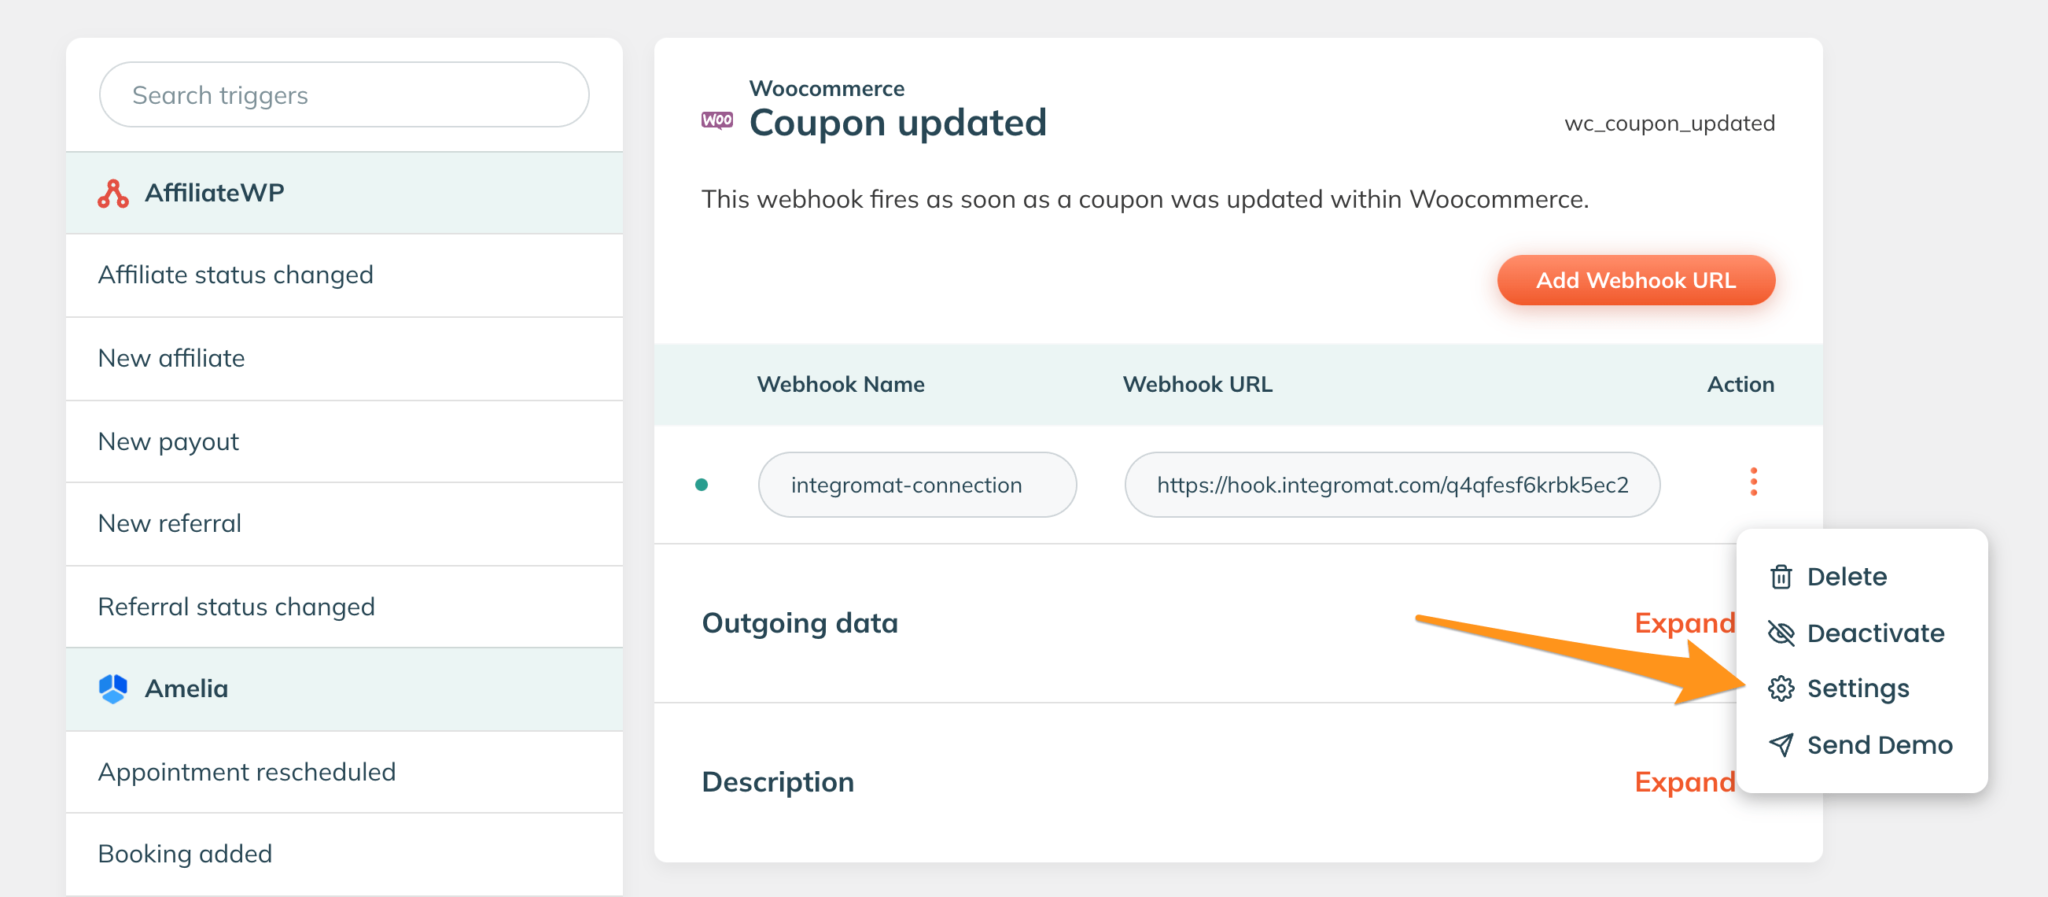 The WP Webhooks screen of the Topic completed trigger